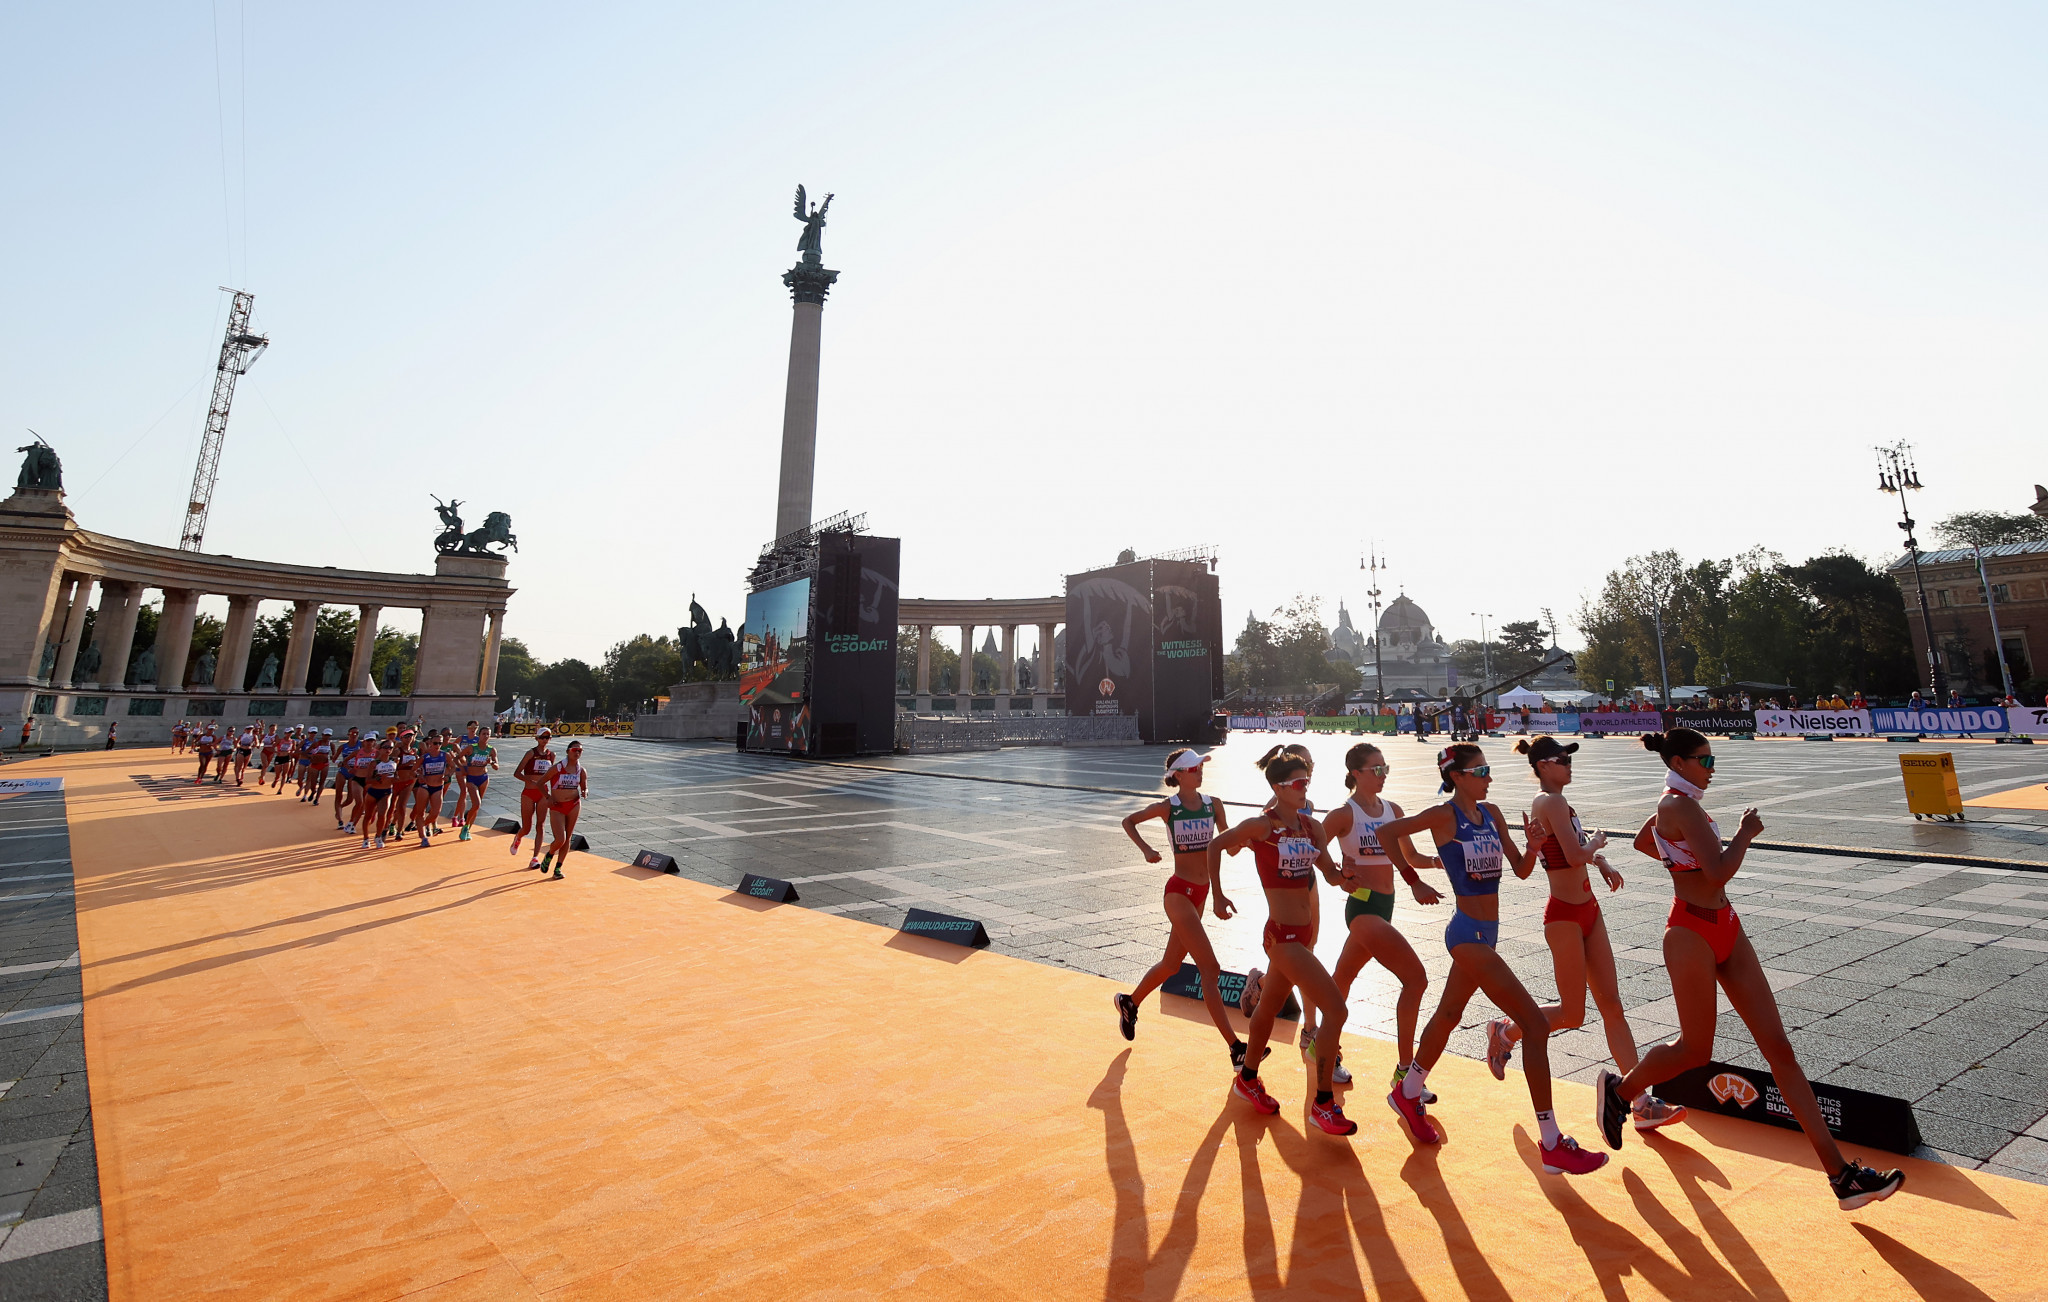 In contrast to the thunderstorms of yesterday's men's 20km race walk, temperatures rose to around 24 degrees Celsius in the sun for the women's event  ©Getty Images